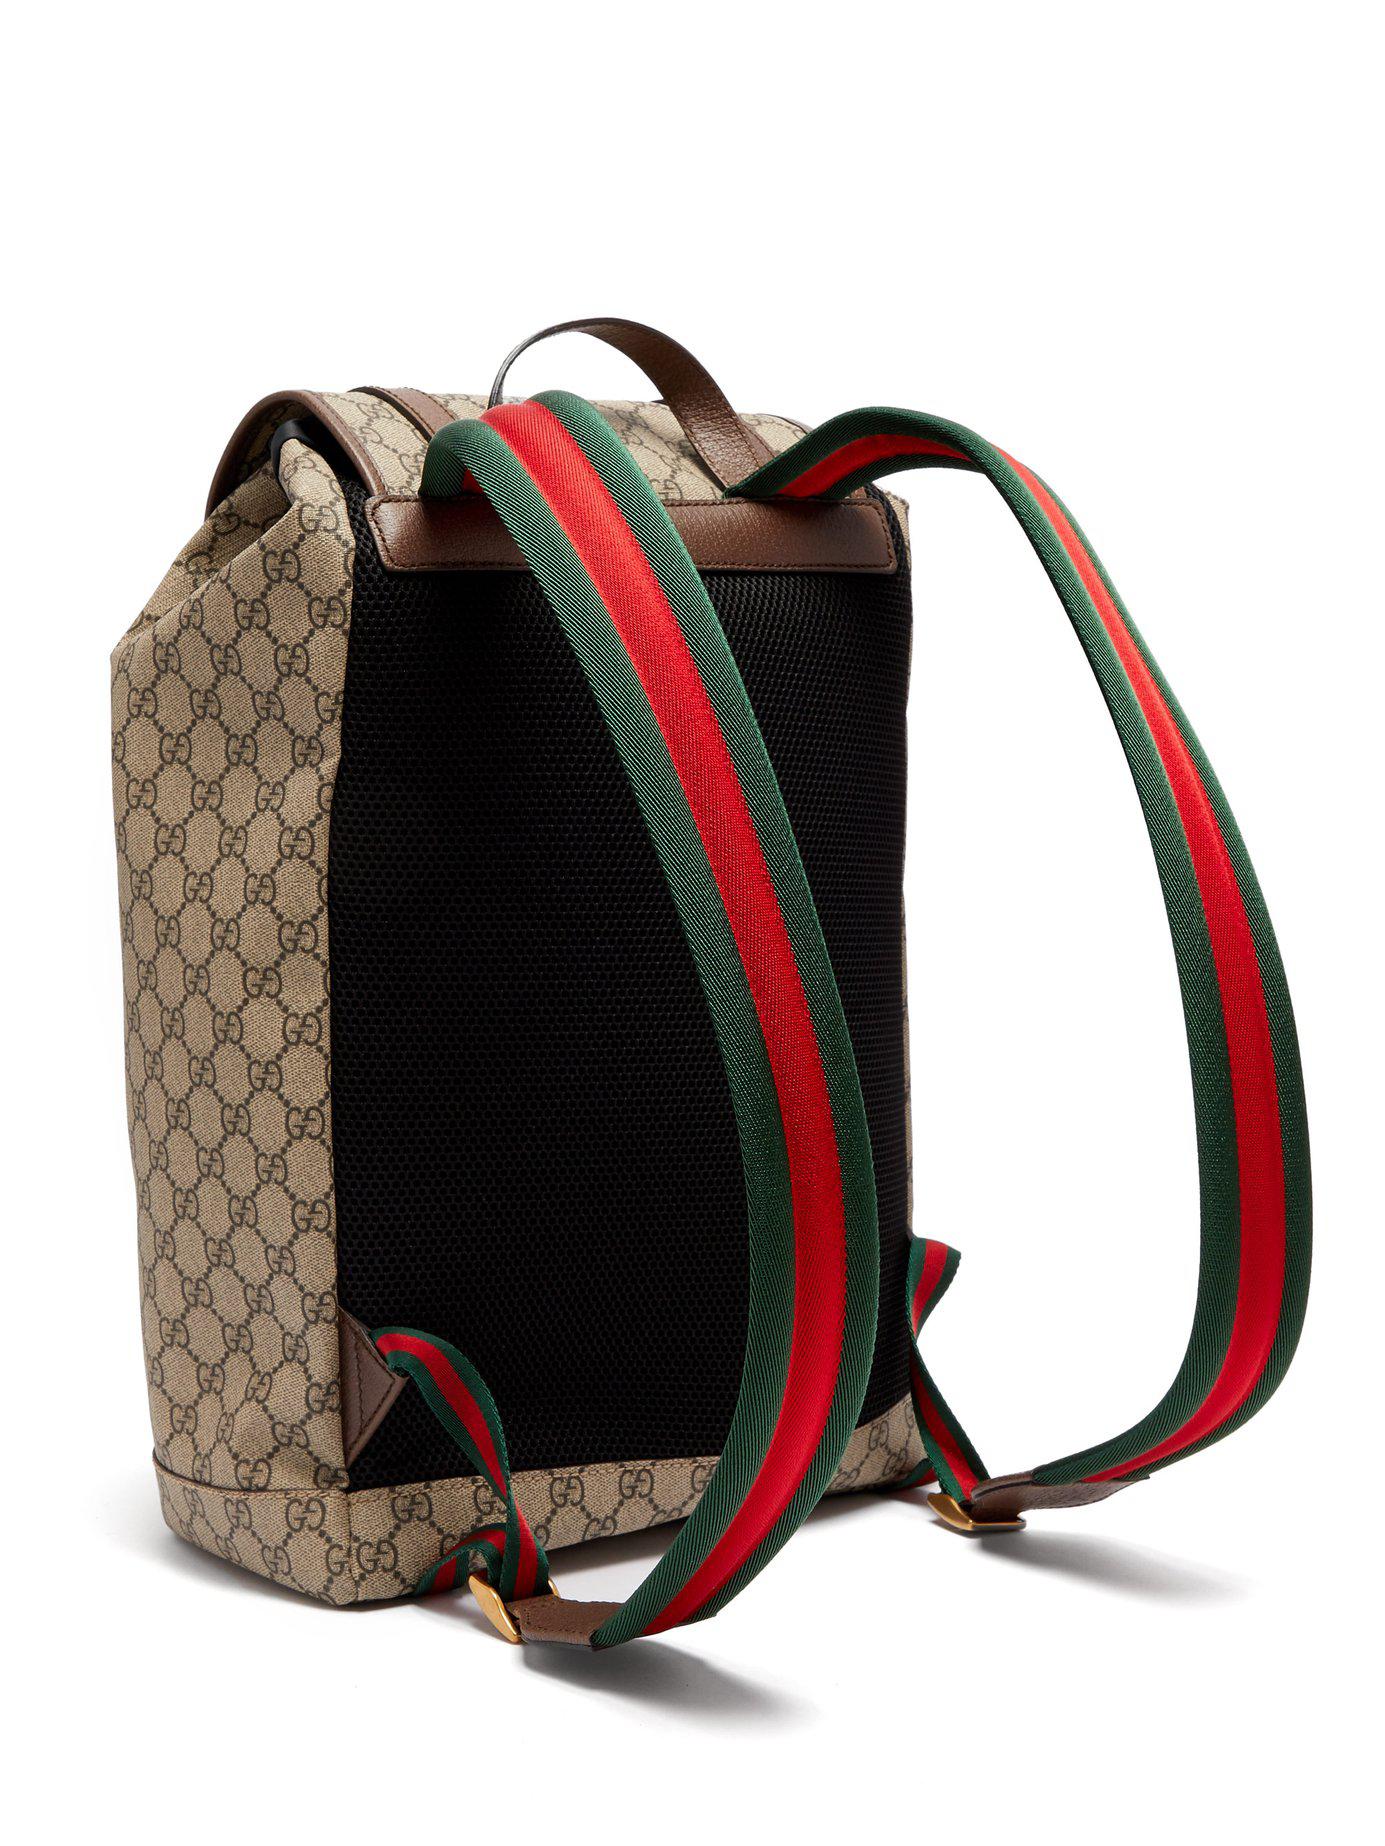 Gucci Black GG Supreme Canvas and Leather Web Backpack Gucci